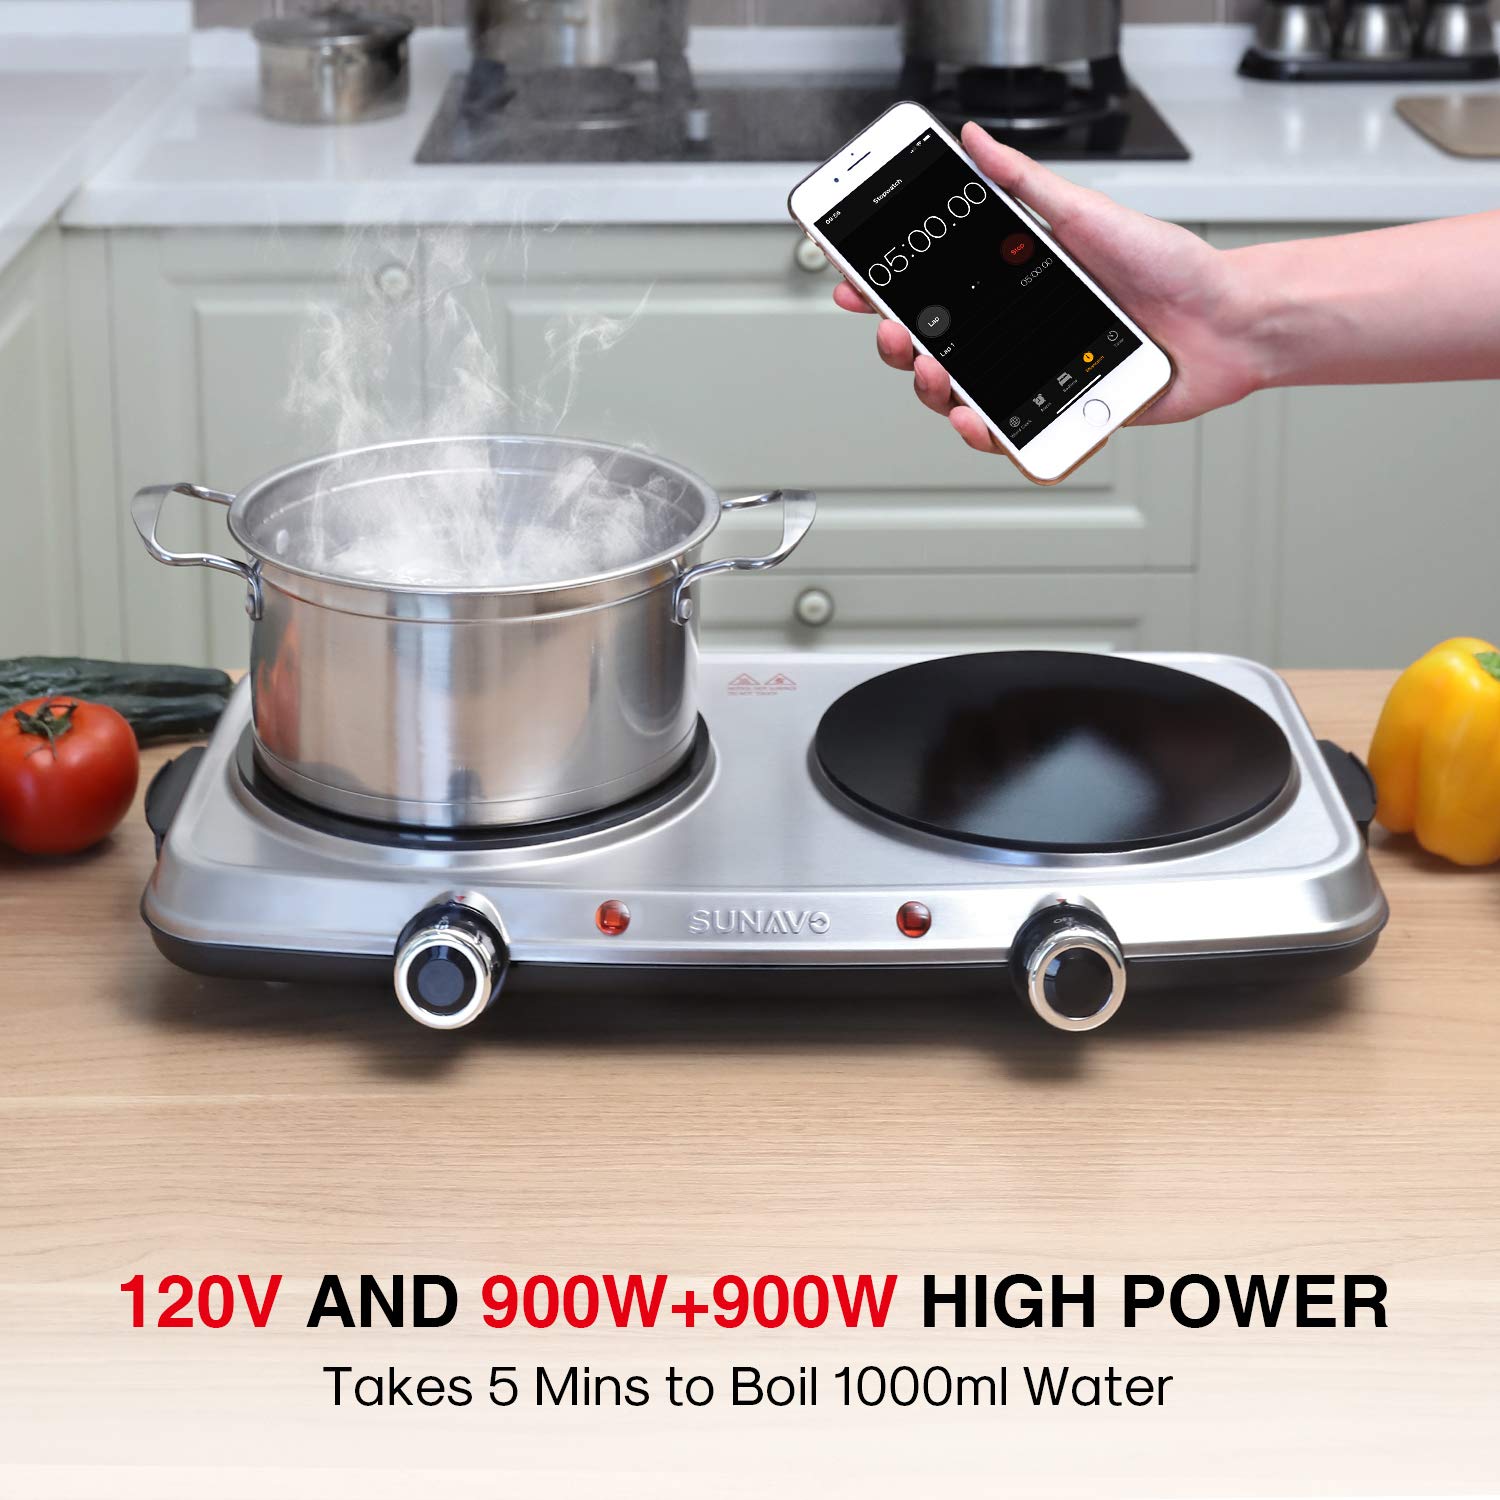 Buy SUNAVO 1500W Hot Plates for Cooking, Electric Single Burner